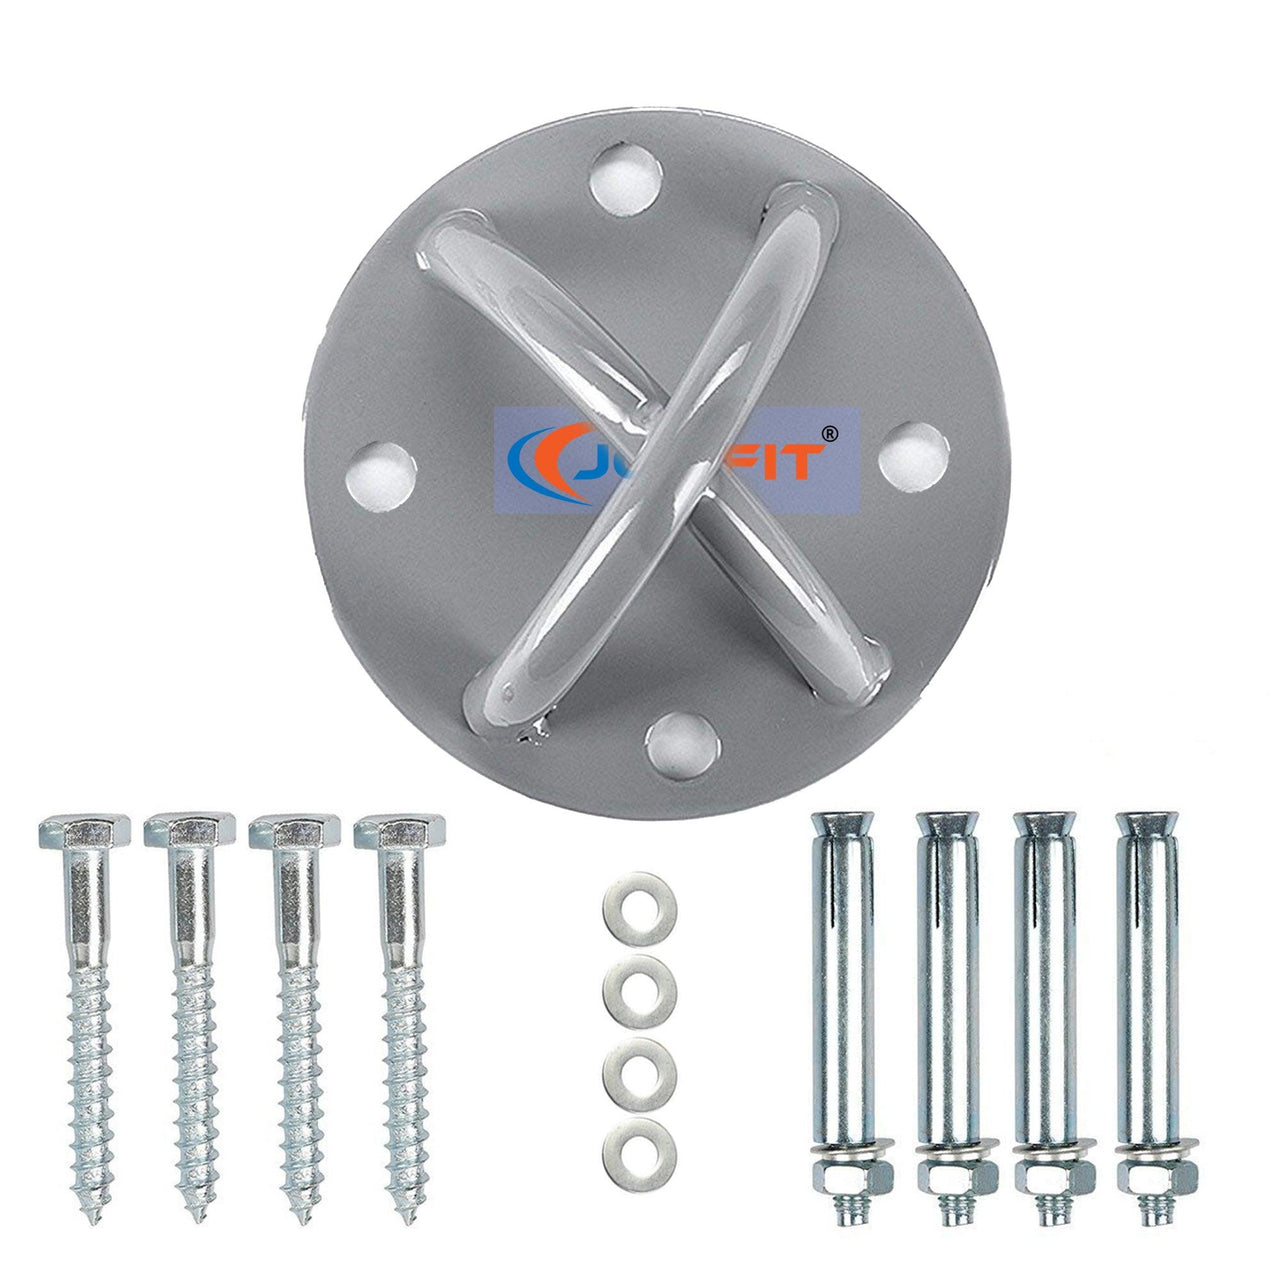 Wall Mount Anchor with bolt and screws